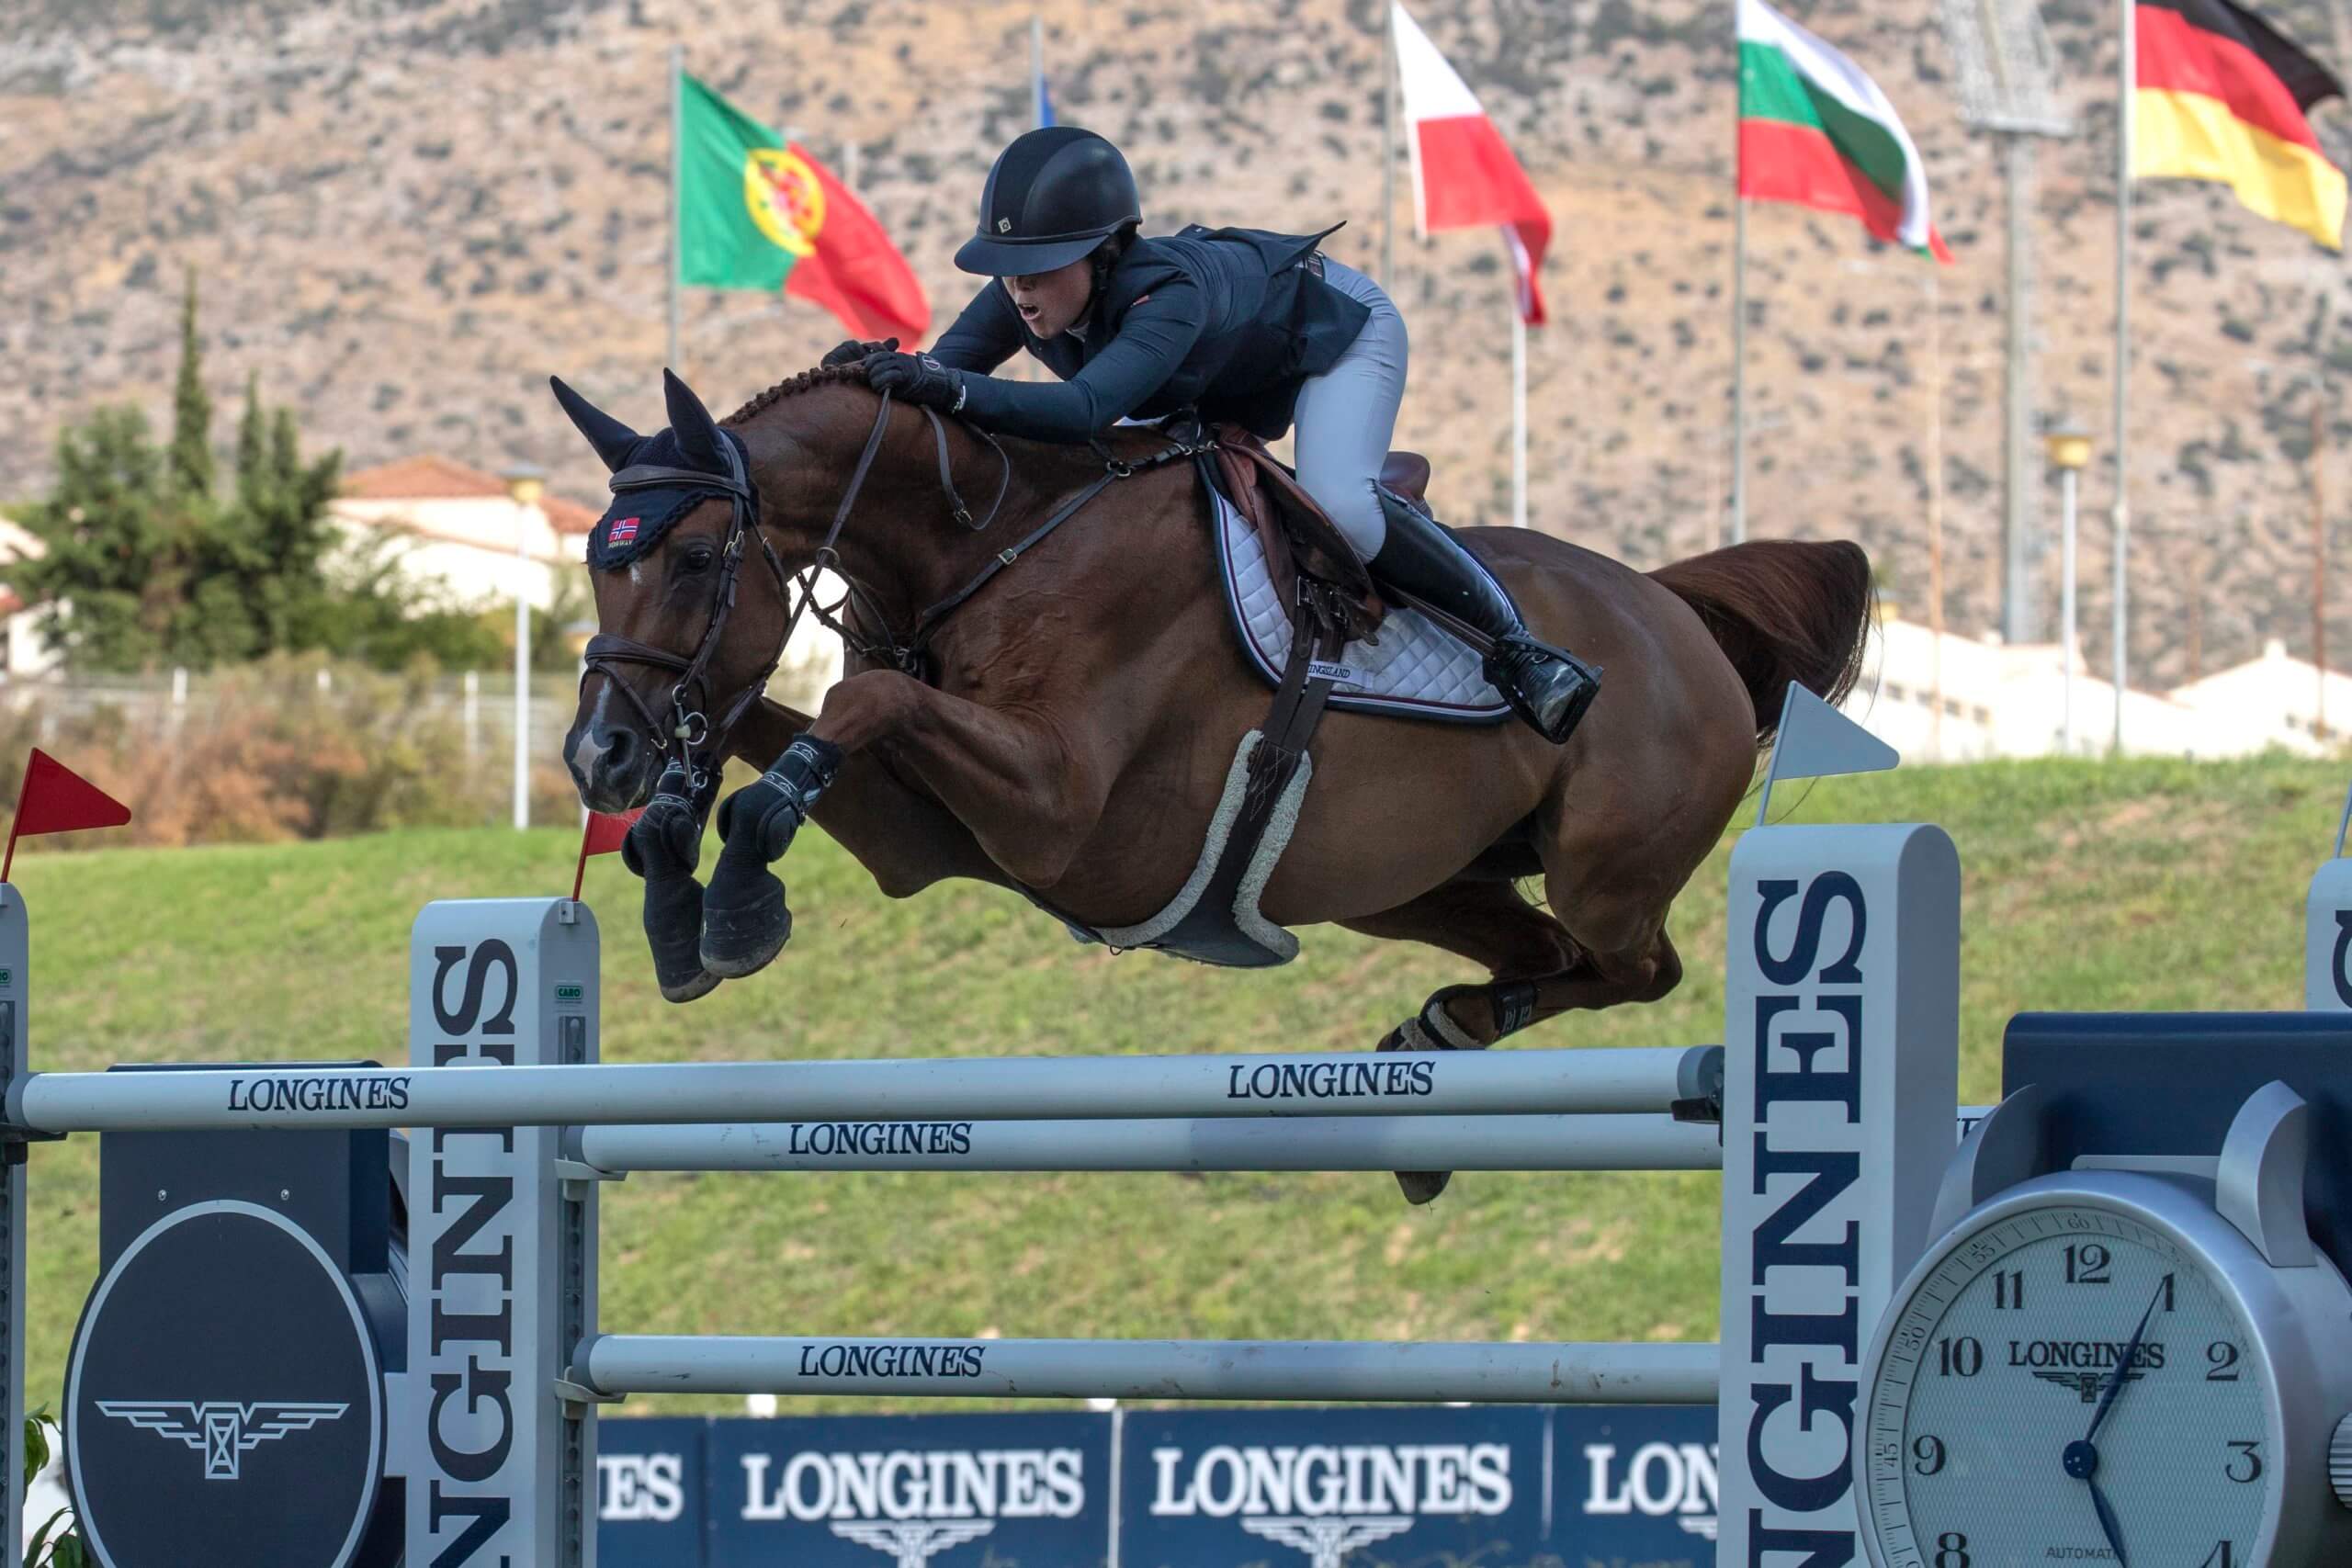 Hege Tidemandsen and Carvis jumped double-clear to help Norway to victory in today’s Longines FEI Jumping Nations Cup™ of Greece, the final of the 2019 Europe Division 2 series, at Athens (GRE). Photo by FEI/Jim Hollander